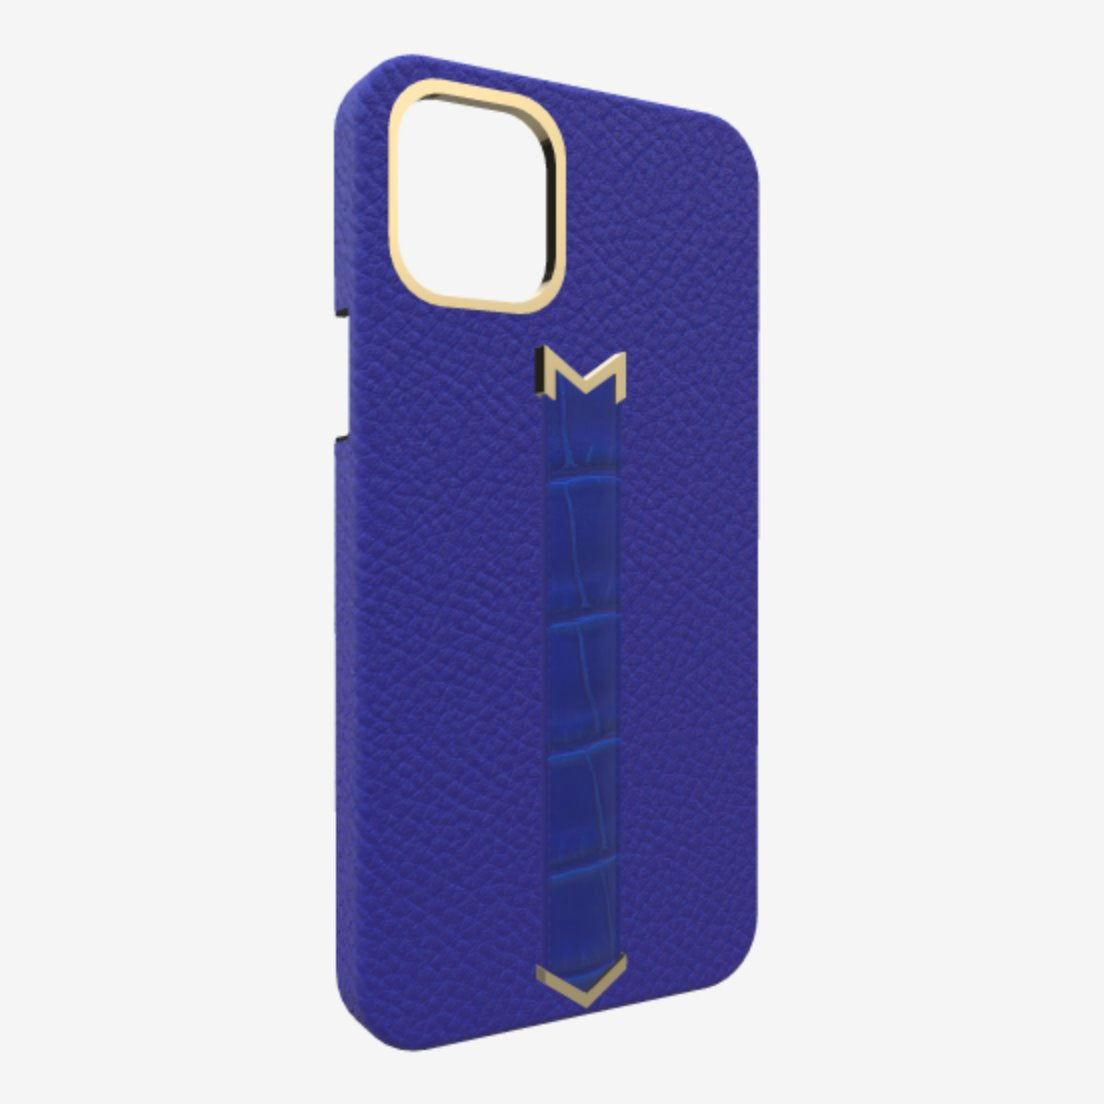 Gold Finger Strap Case for iPhone 13 Pro Max in Genuine Calfskin and Alligator Electric Blue Electric Blue 